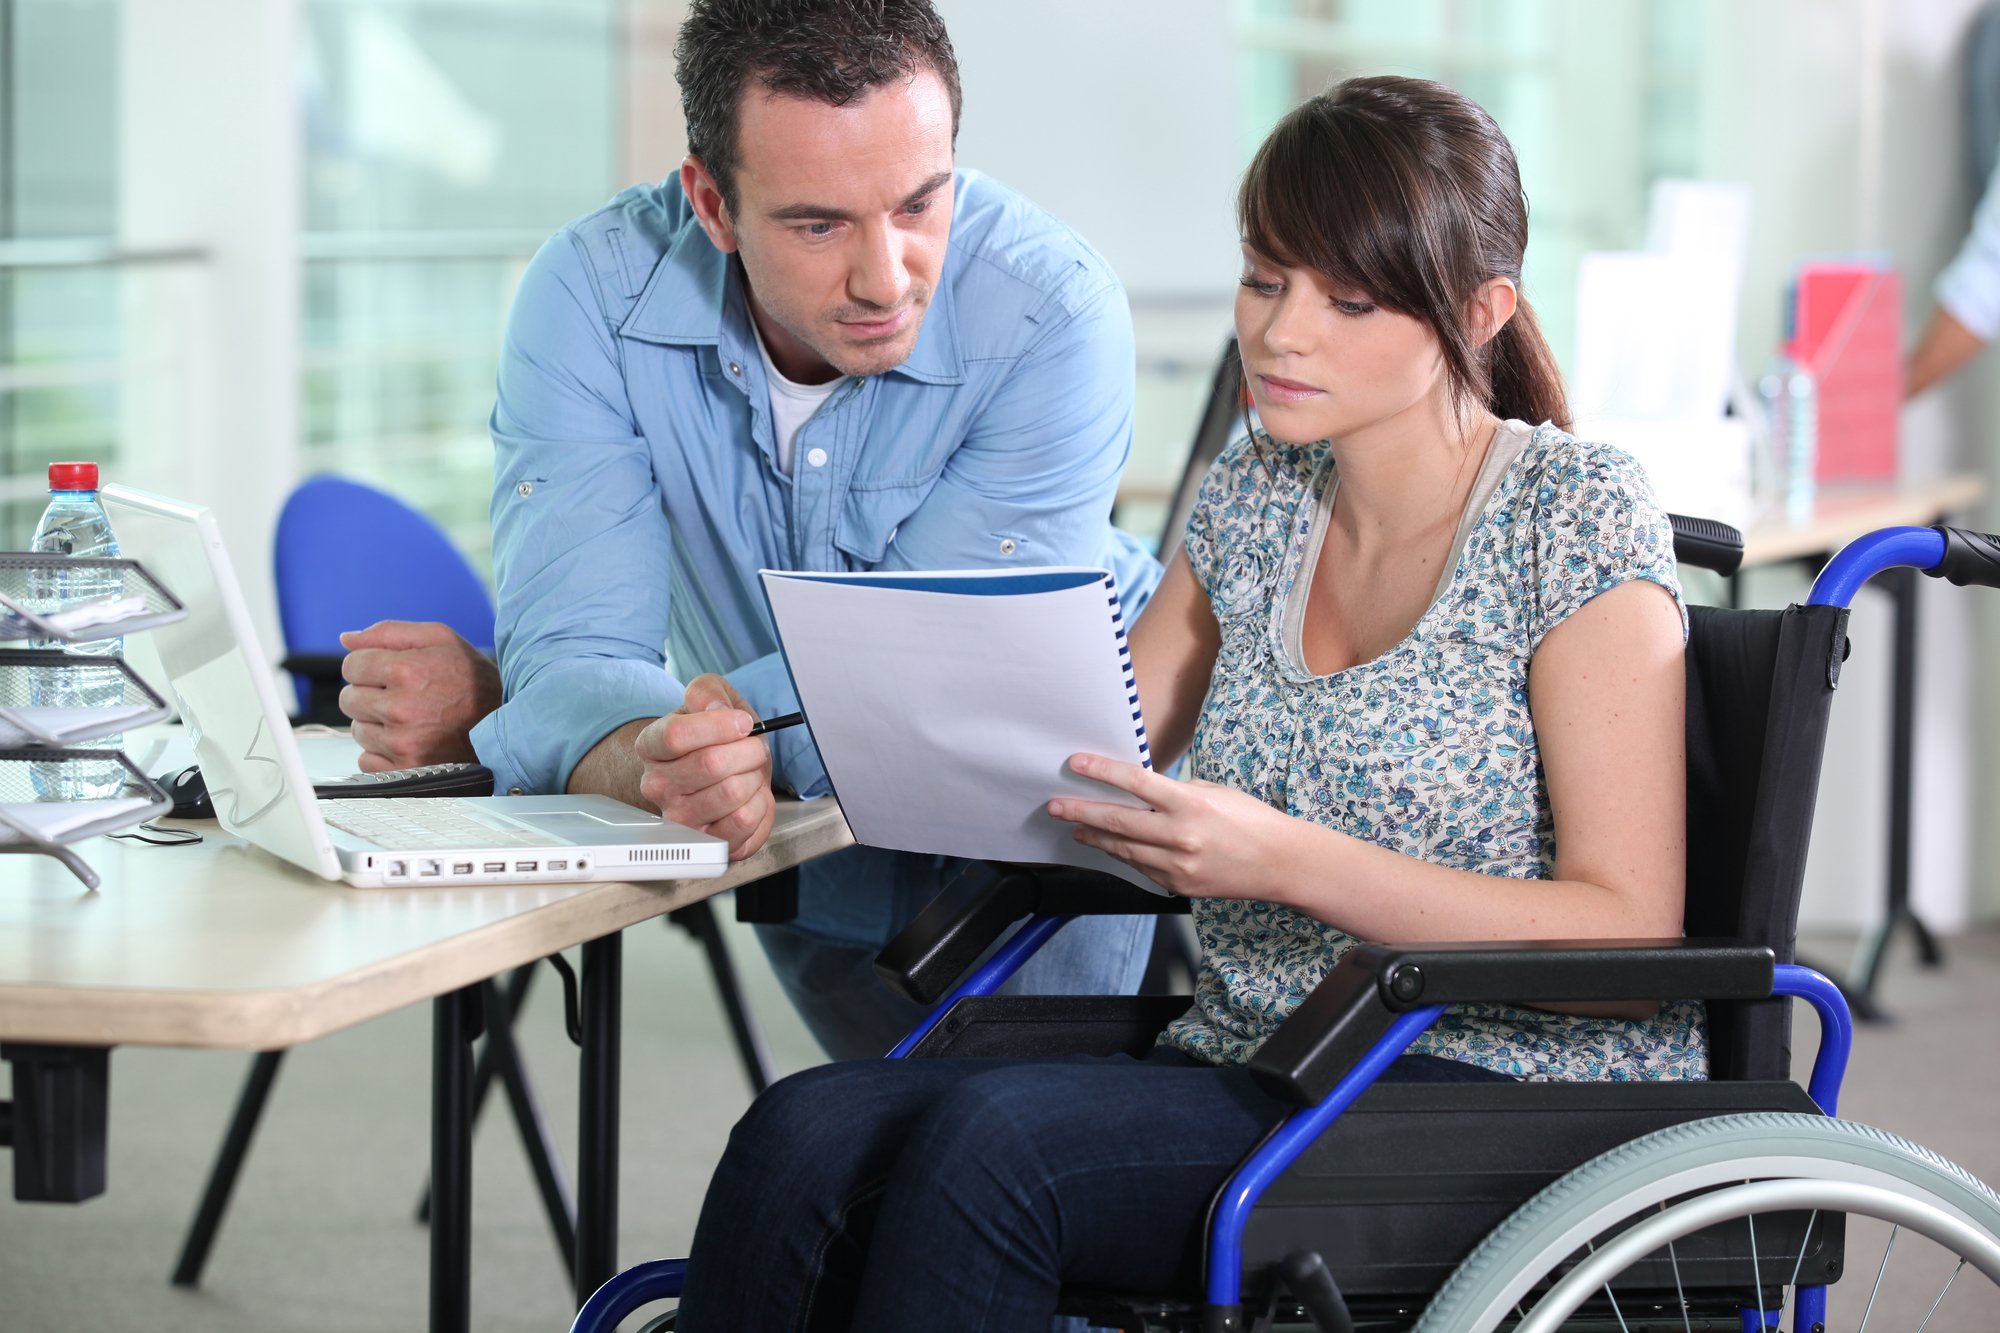 Young woman in wheelchair working with a male colleague